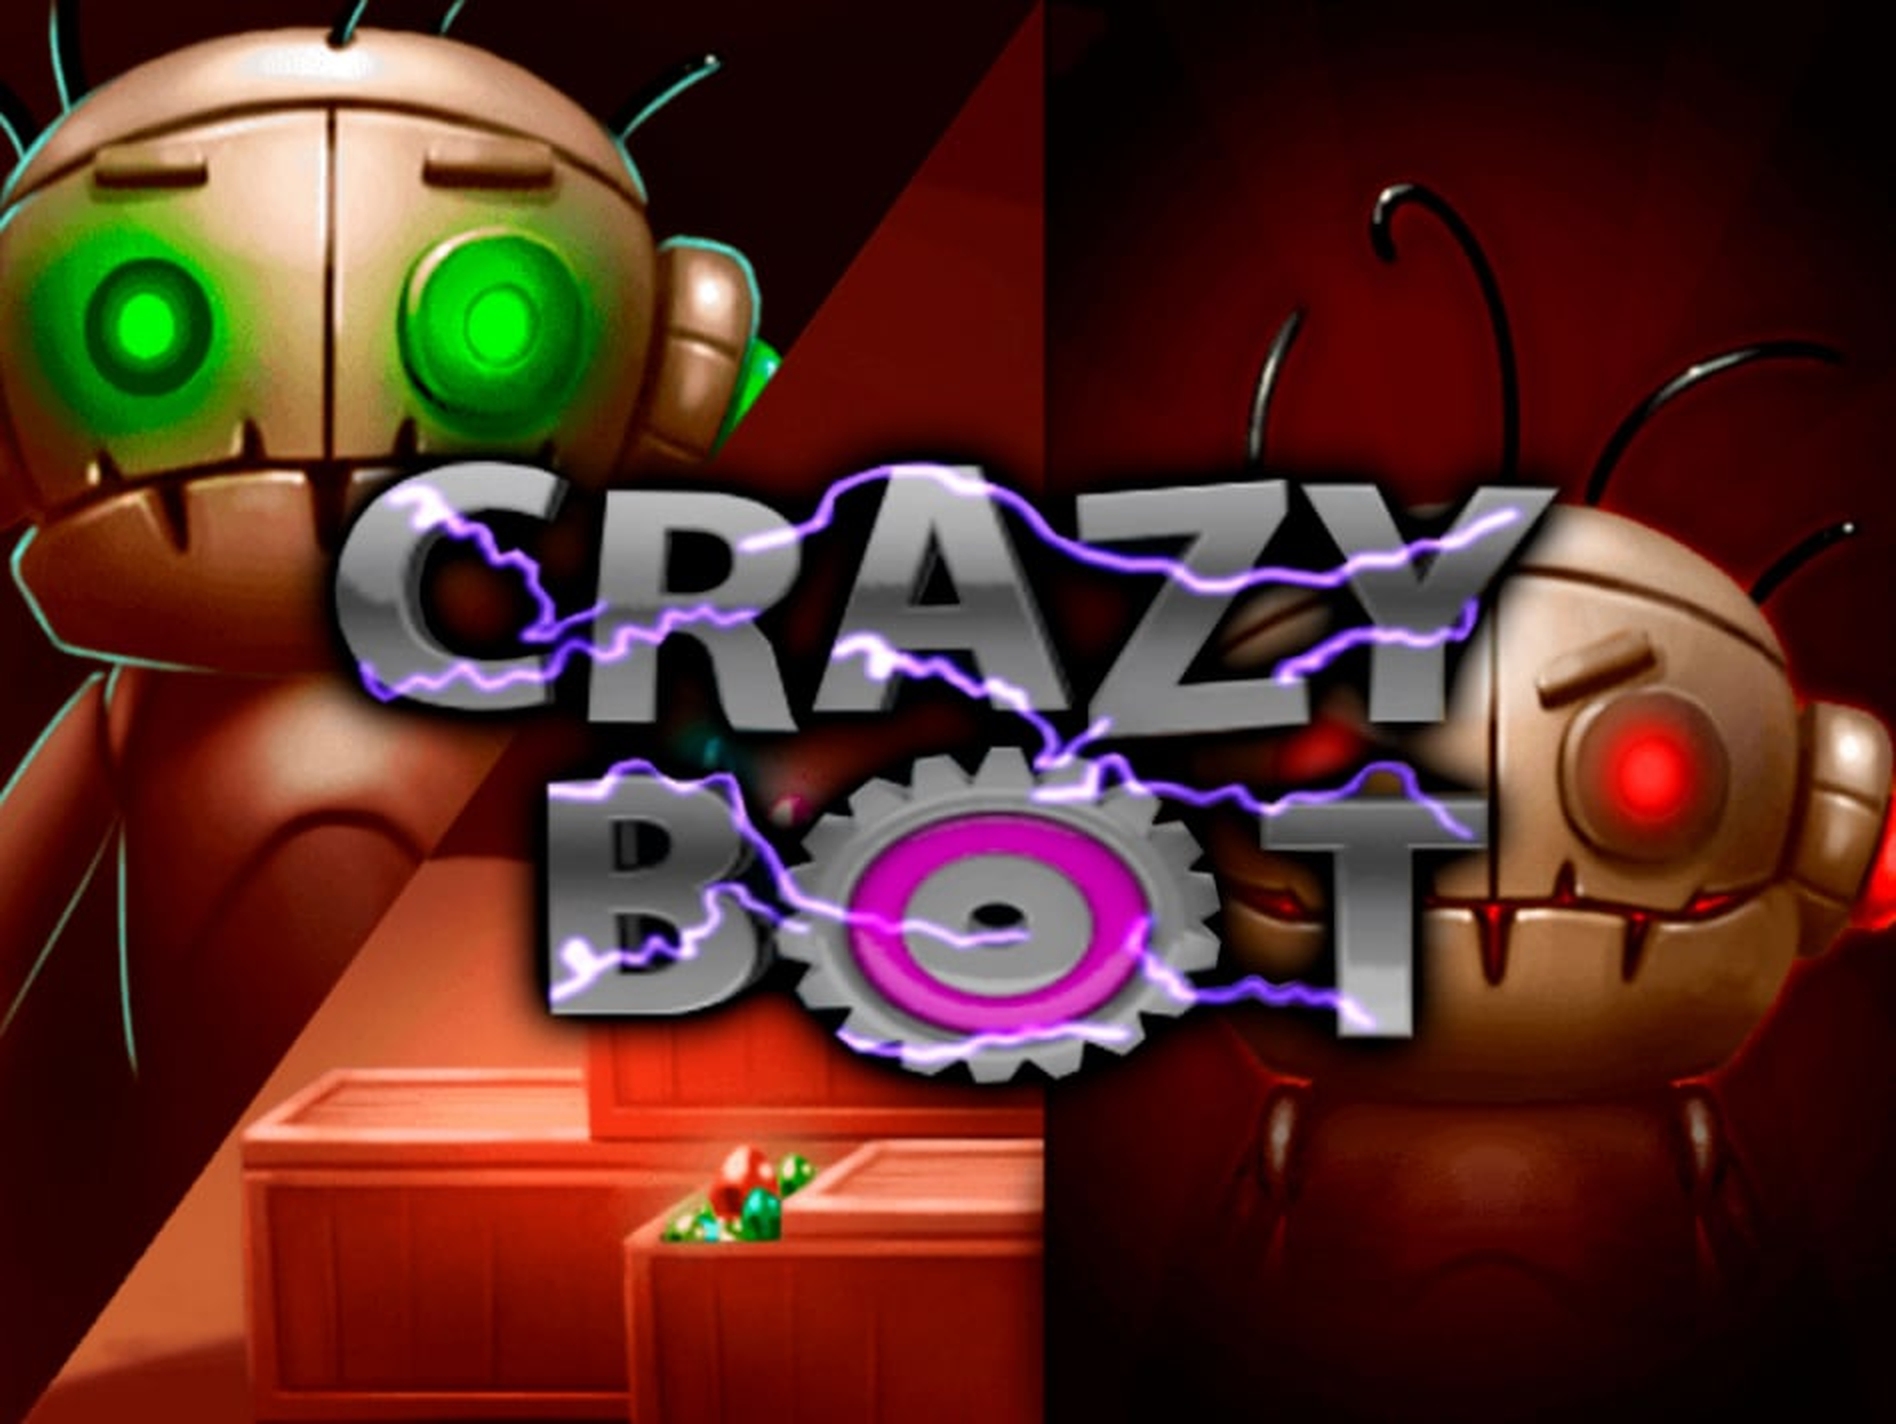 The Crazy Bot Online Slot Demo Game by Fugaso